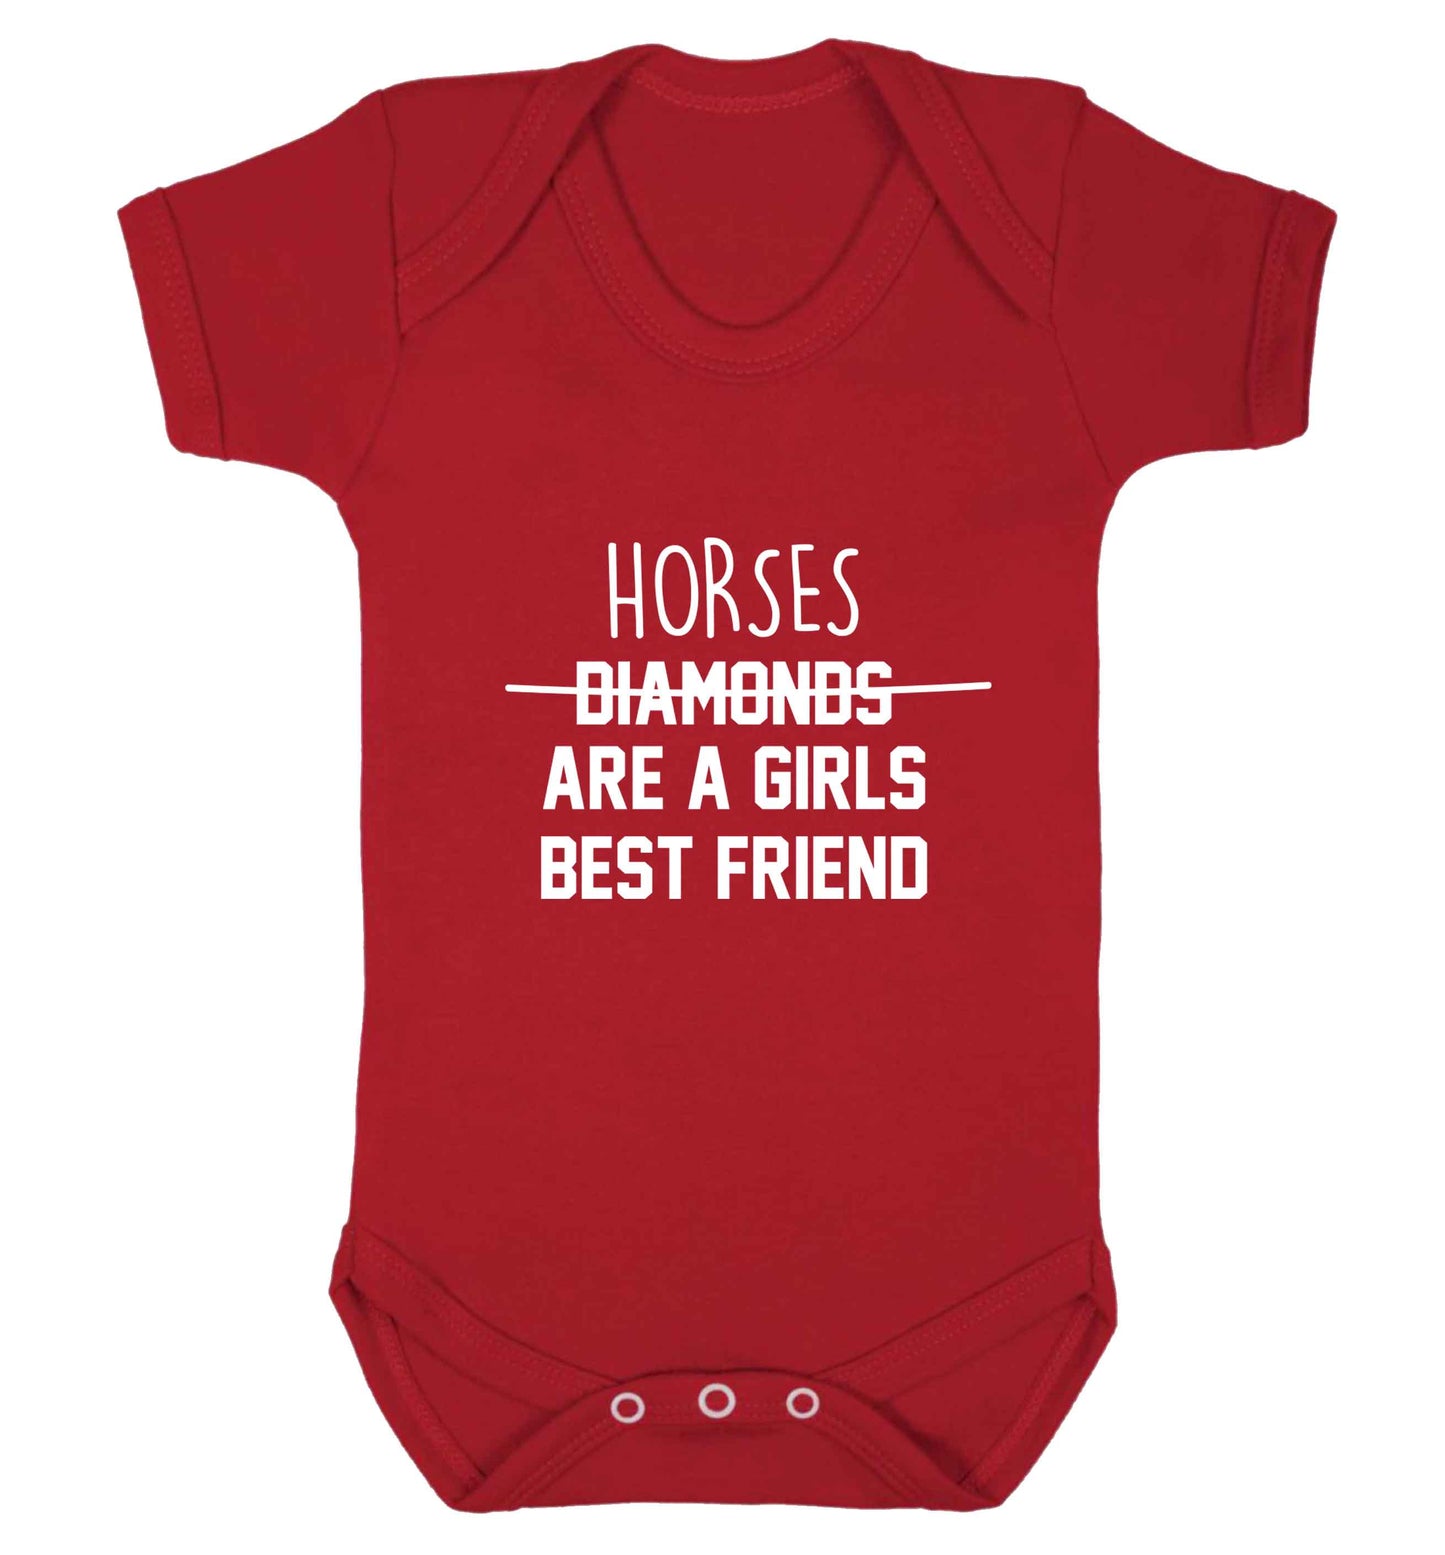 Horses are a girls best friend baby vest red 18-24 months